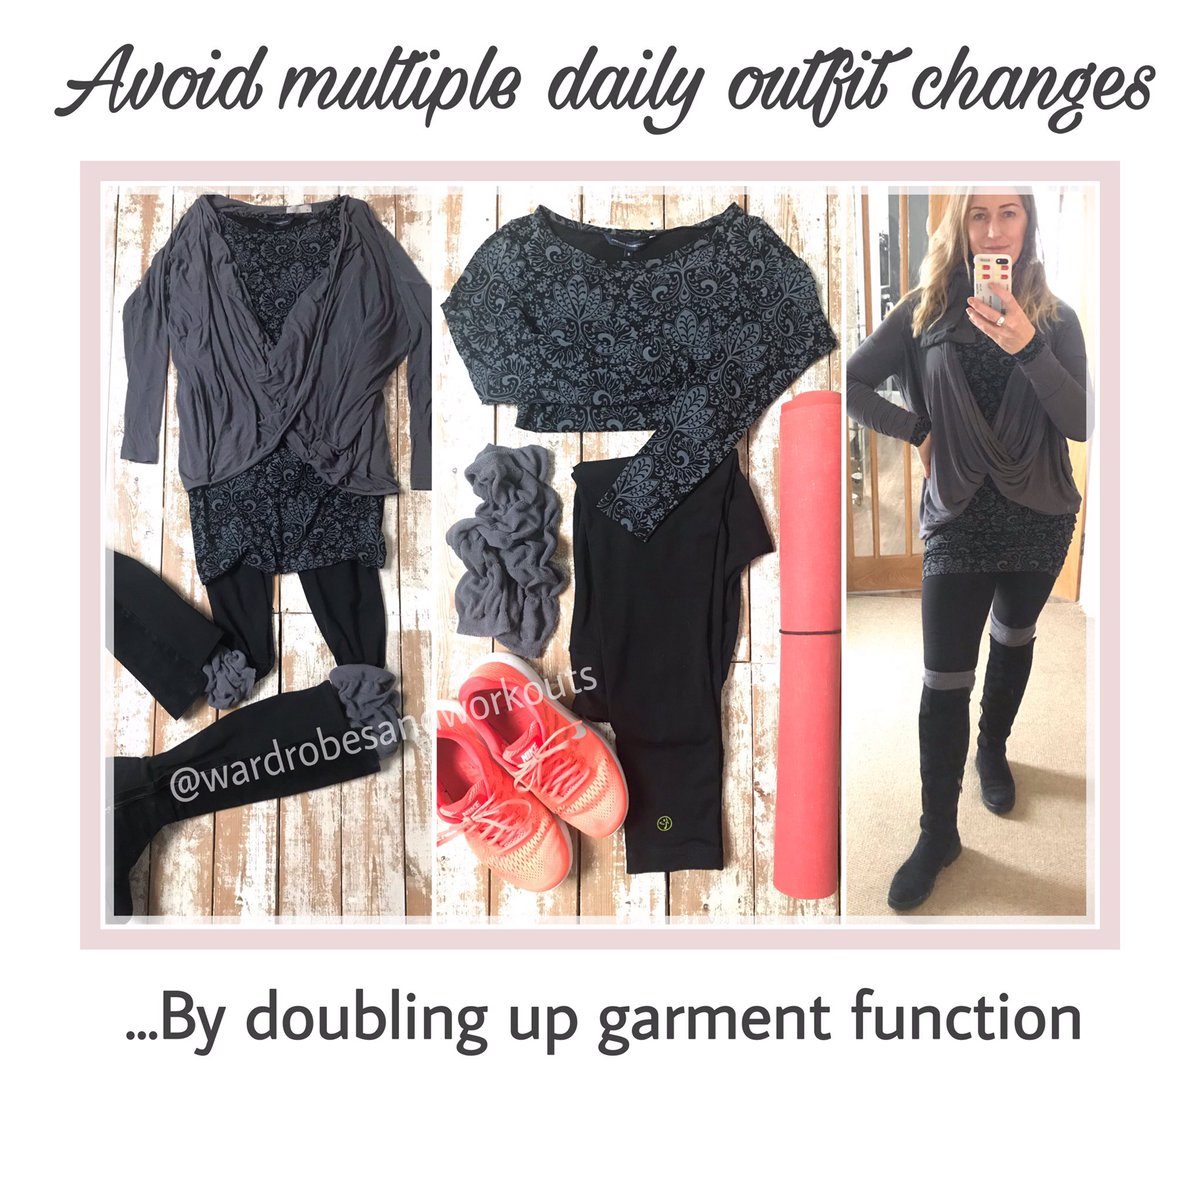 Book a free 30min consultation with me to find out how your clothes can be multi functional & stylish #multibusinessowner #wardrobeeditor #fitnessinstructor